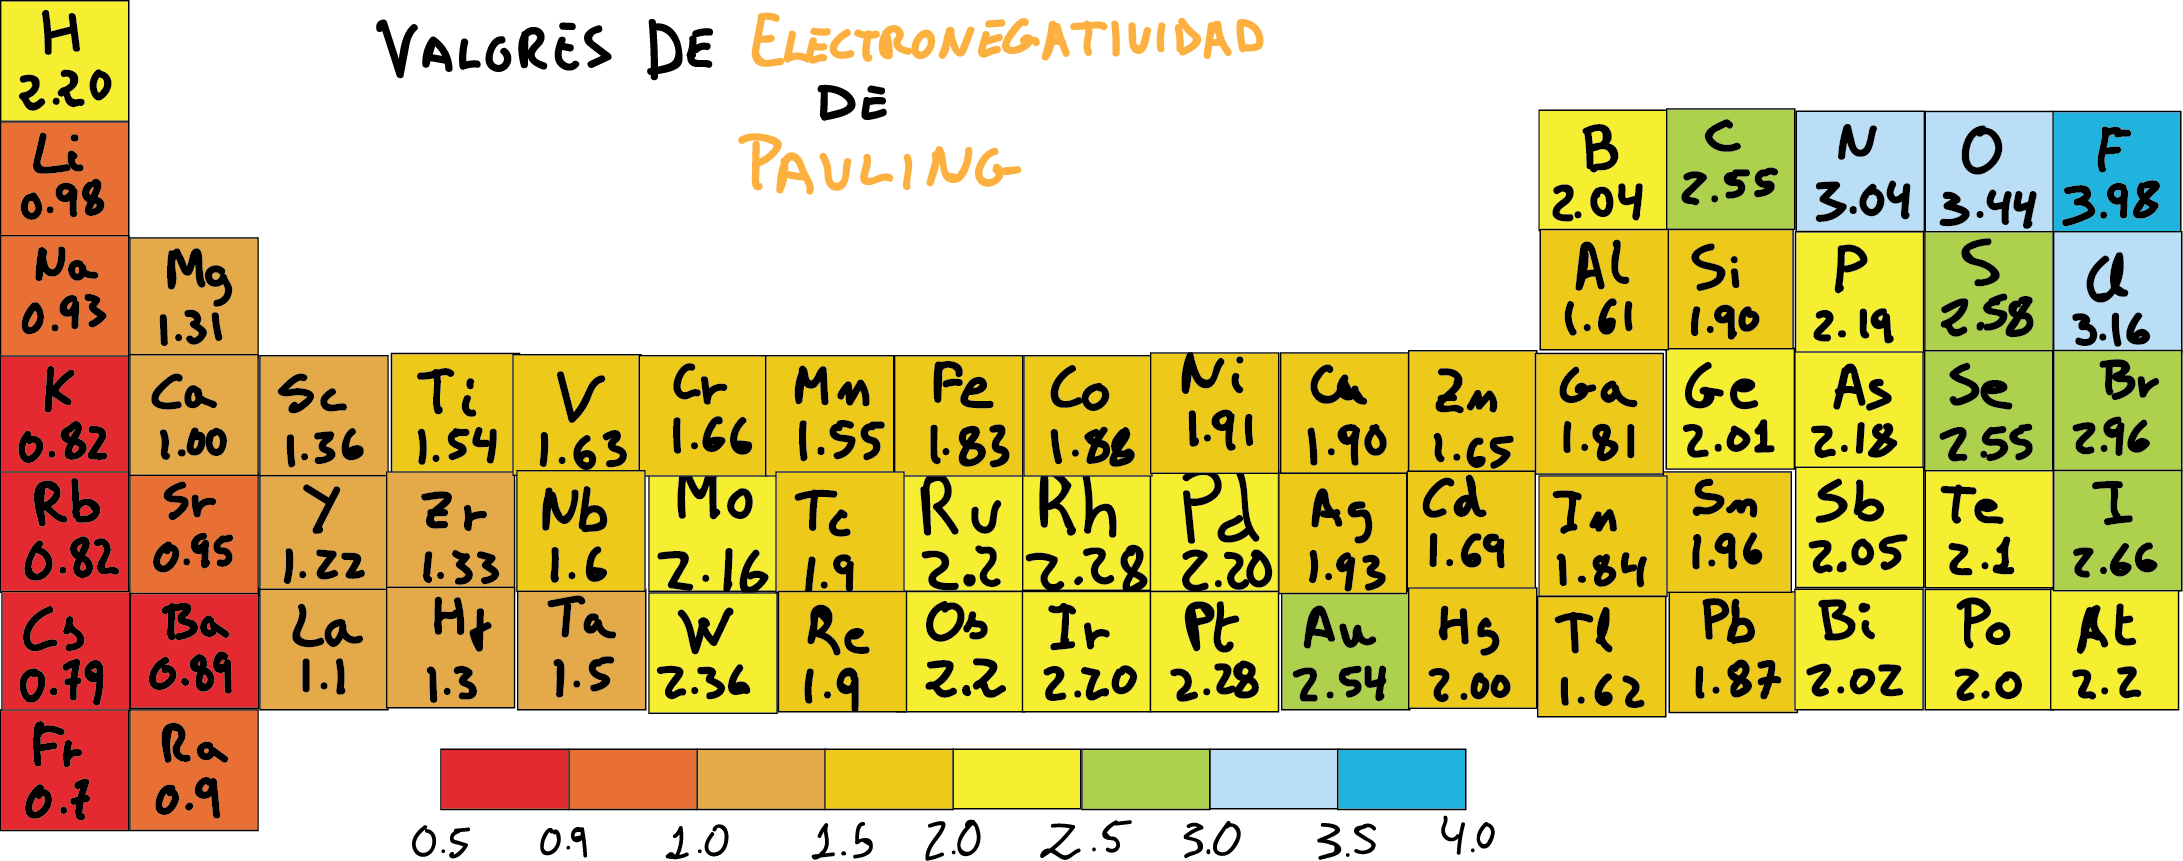 table of electronegativity Pauling